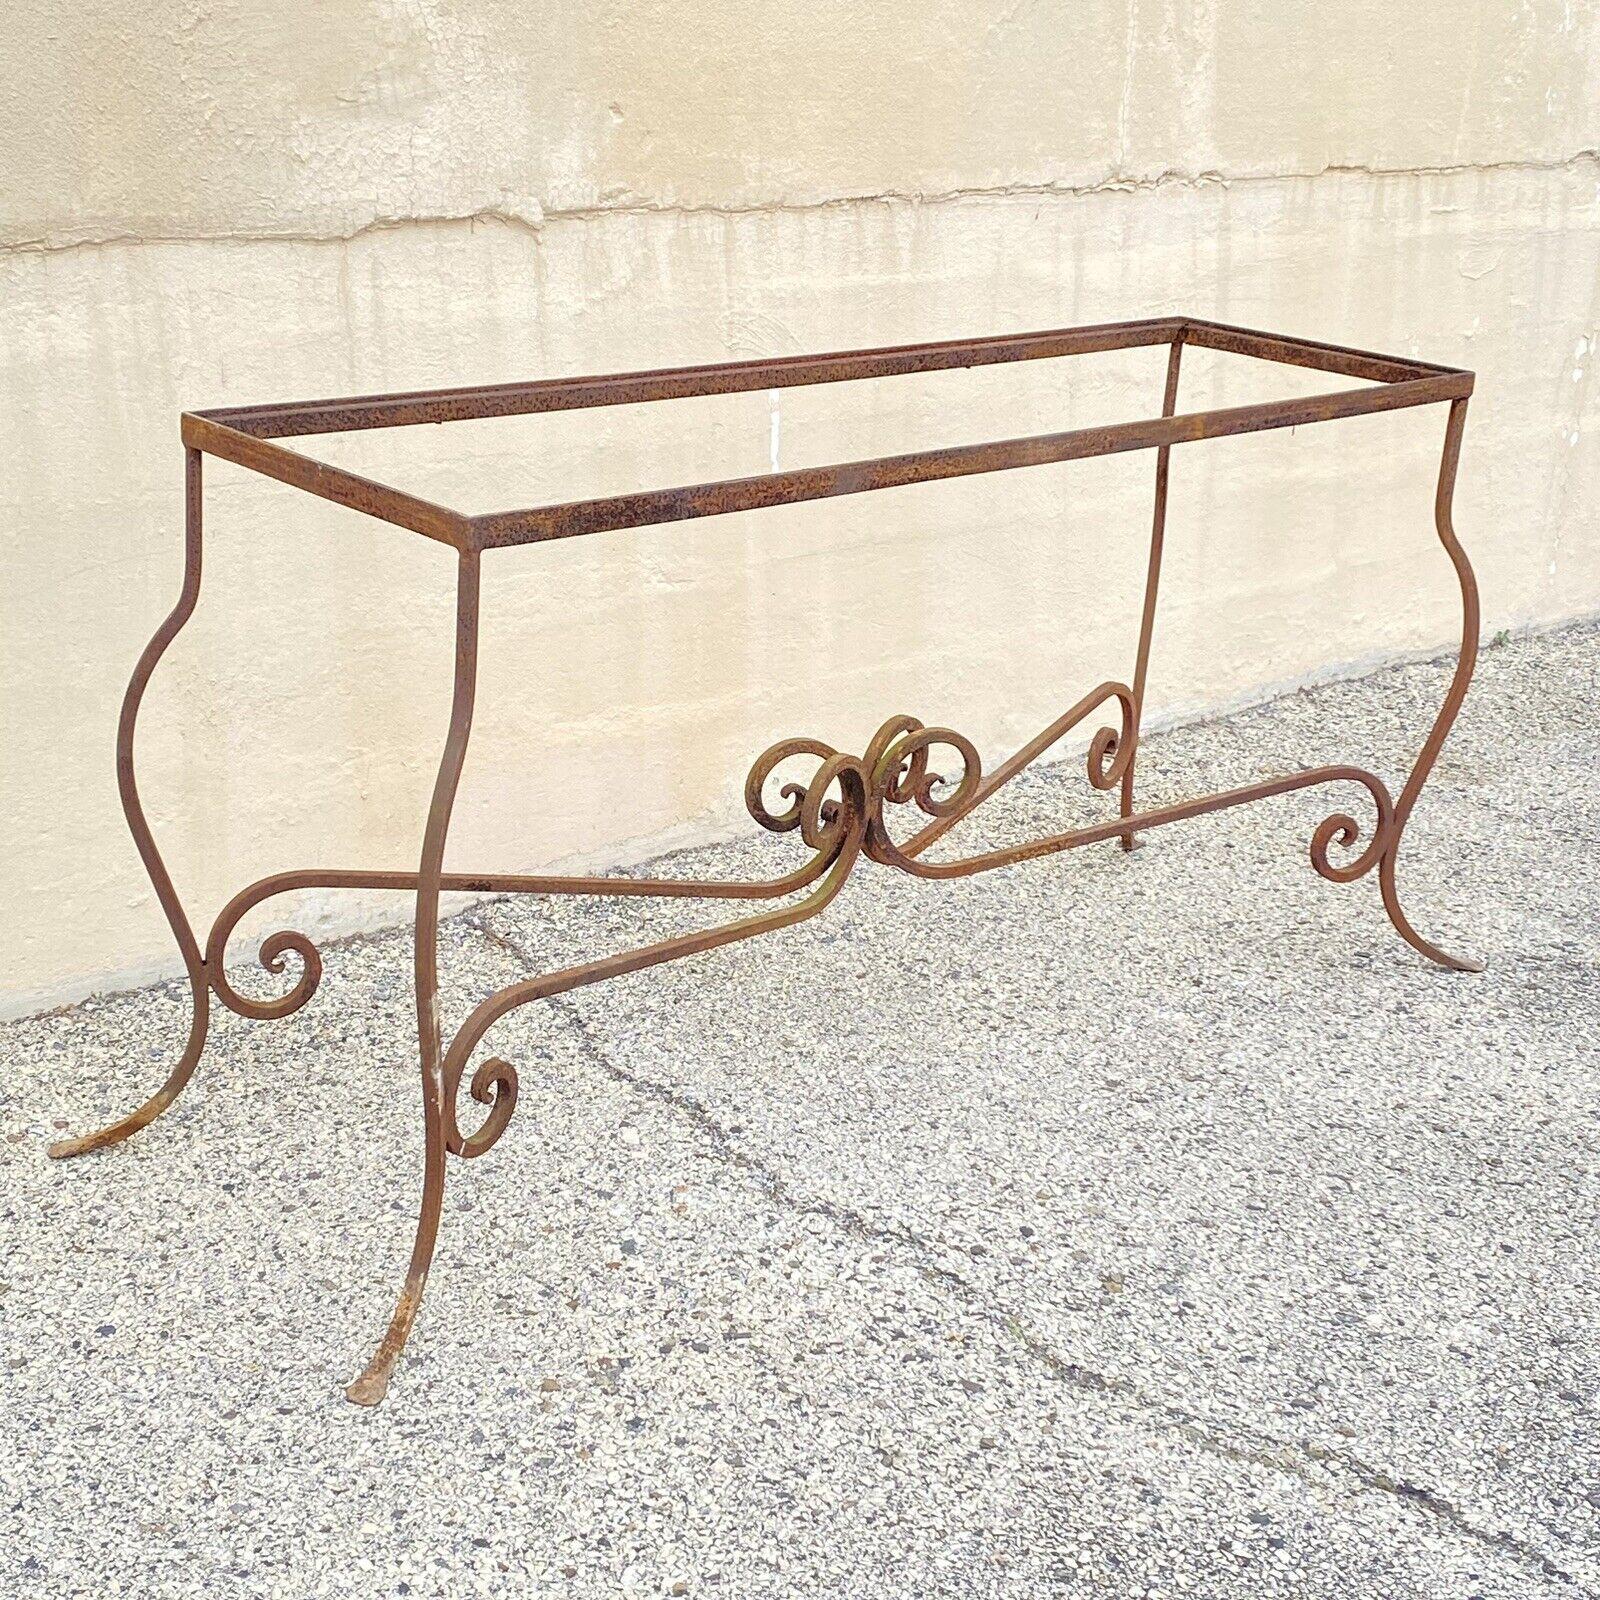 Antique Wrought Iron French Pastry Style Scrolling Garden Long Console Table. Item features a heavy wrought iron construction, stretcher base, rusty brown finish, long impressive form, very nice vintage item. Circa Mid to Late 20th